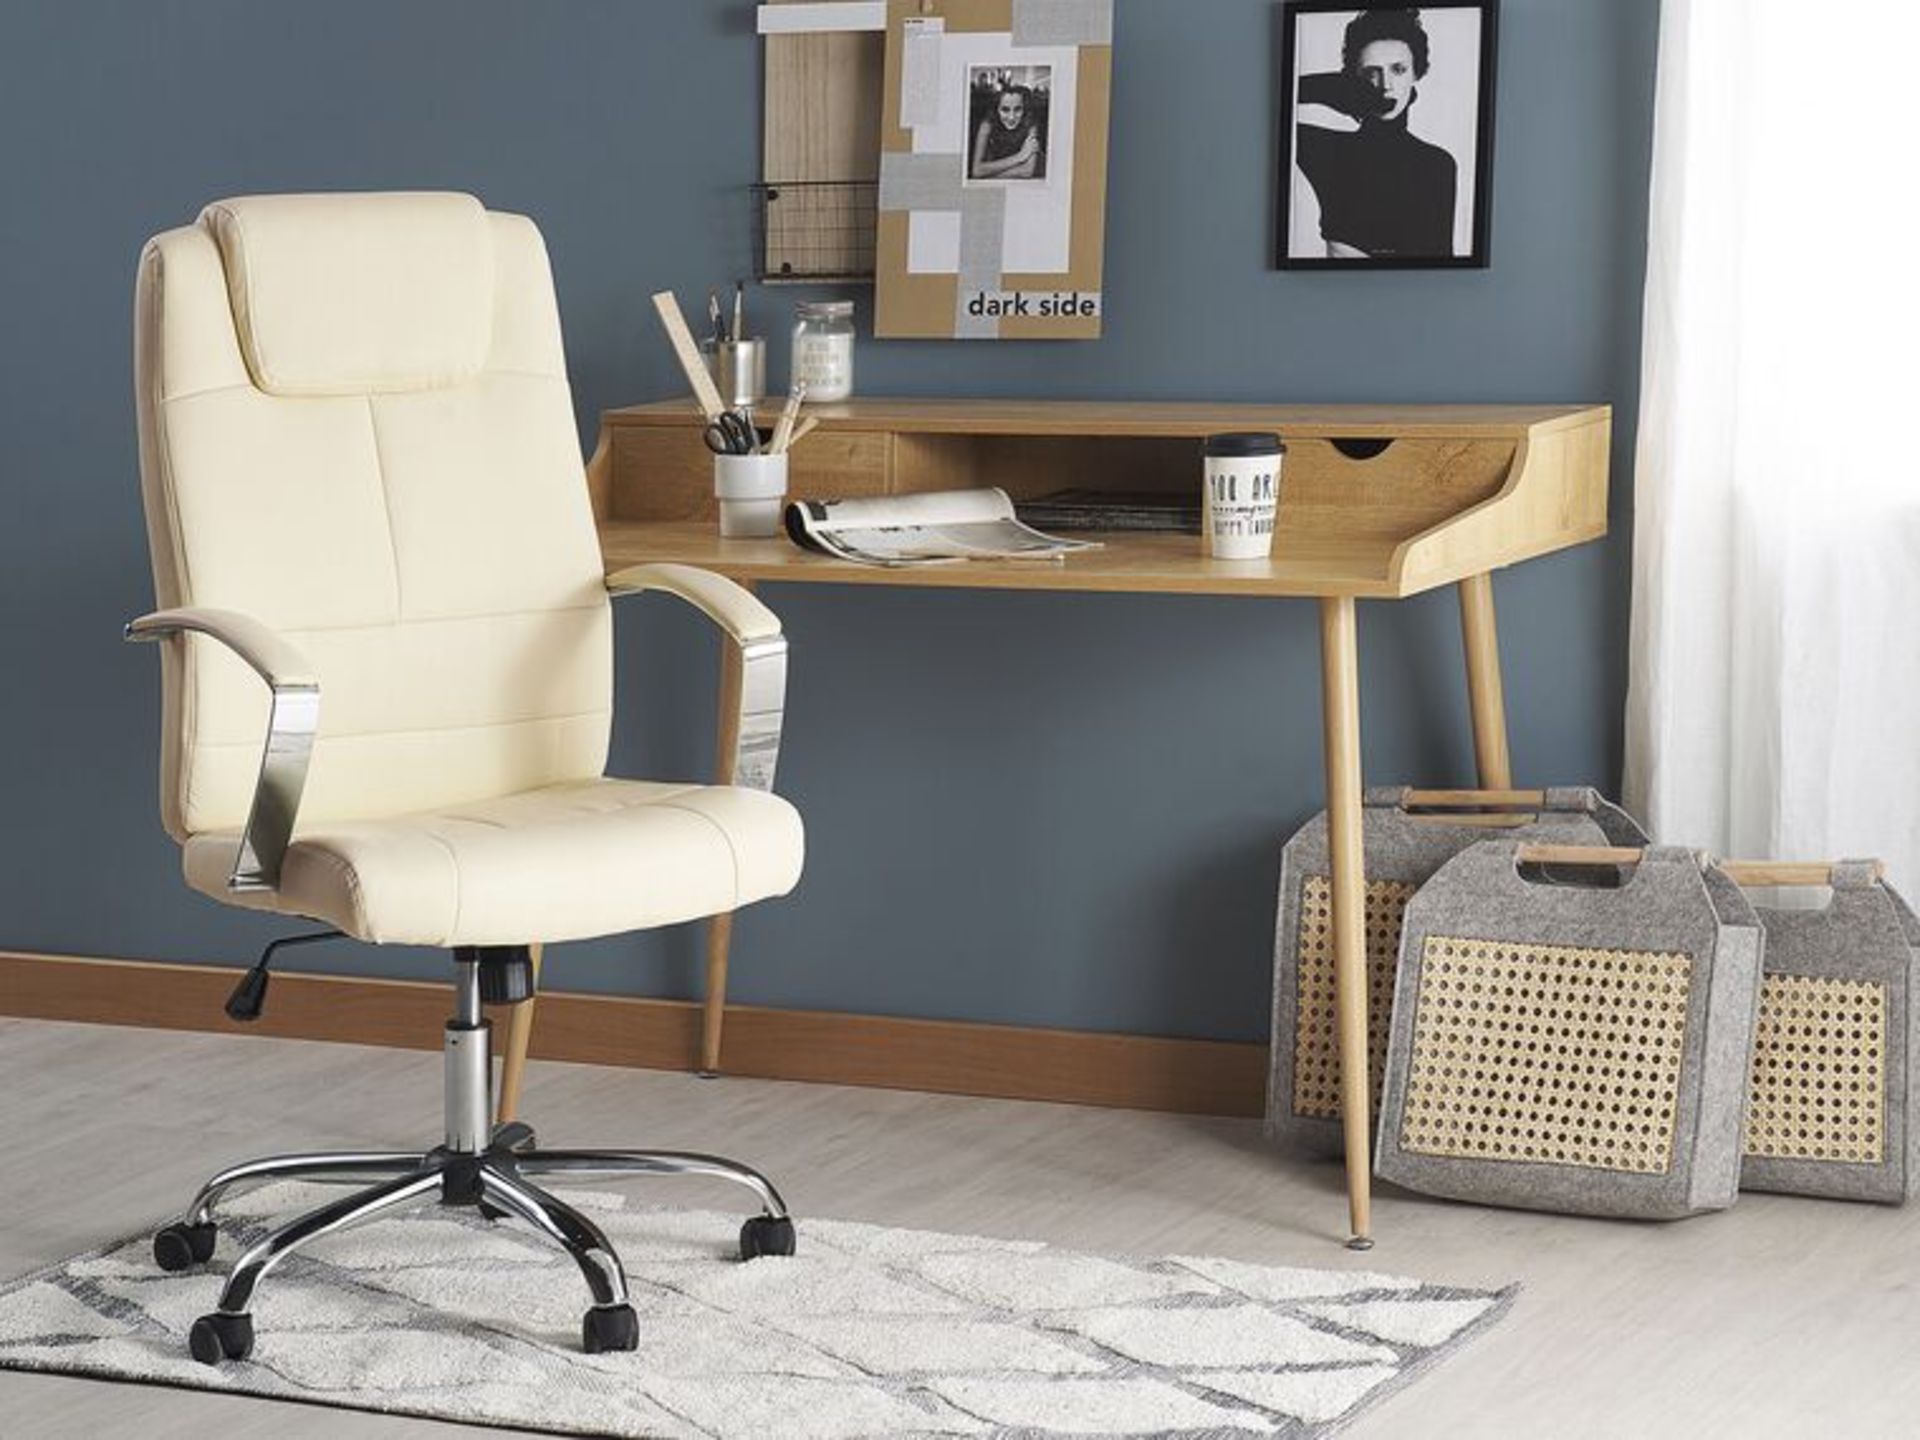 Winner Faux Leather Executive Chair Beige. - ER24. RRP £239.99. Gaming or work, this office chair is